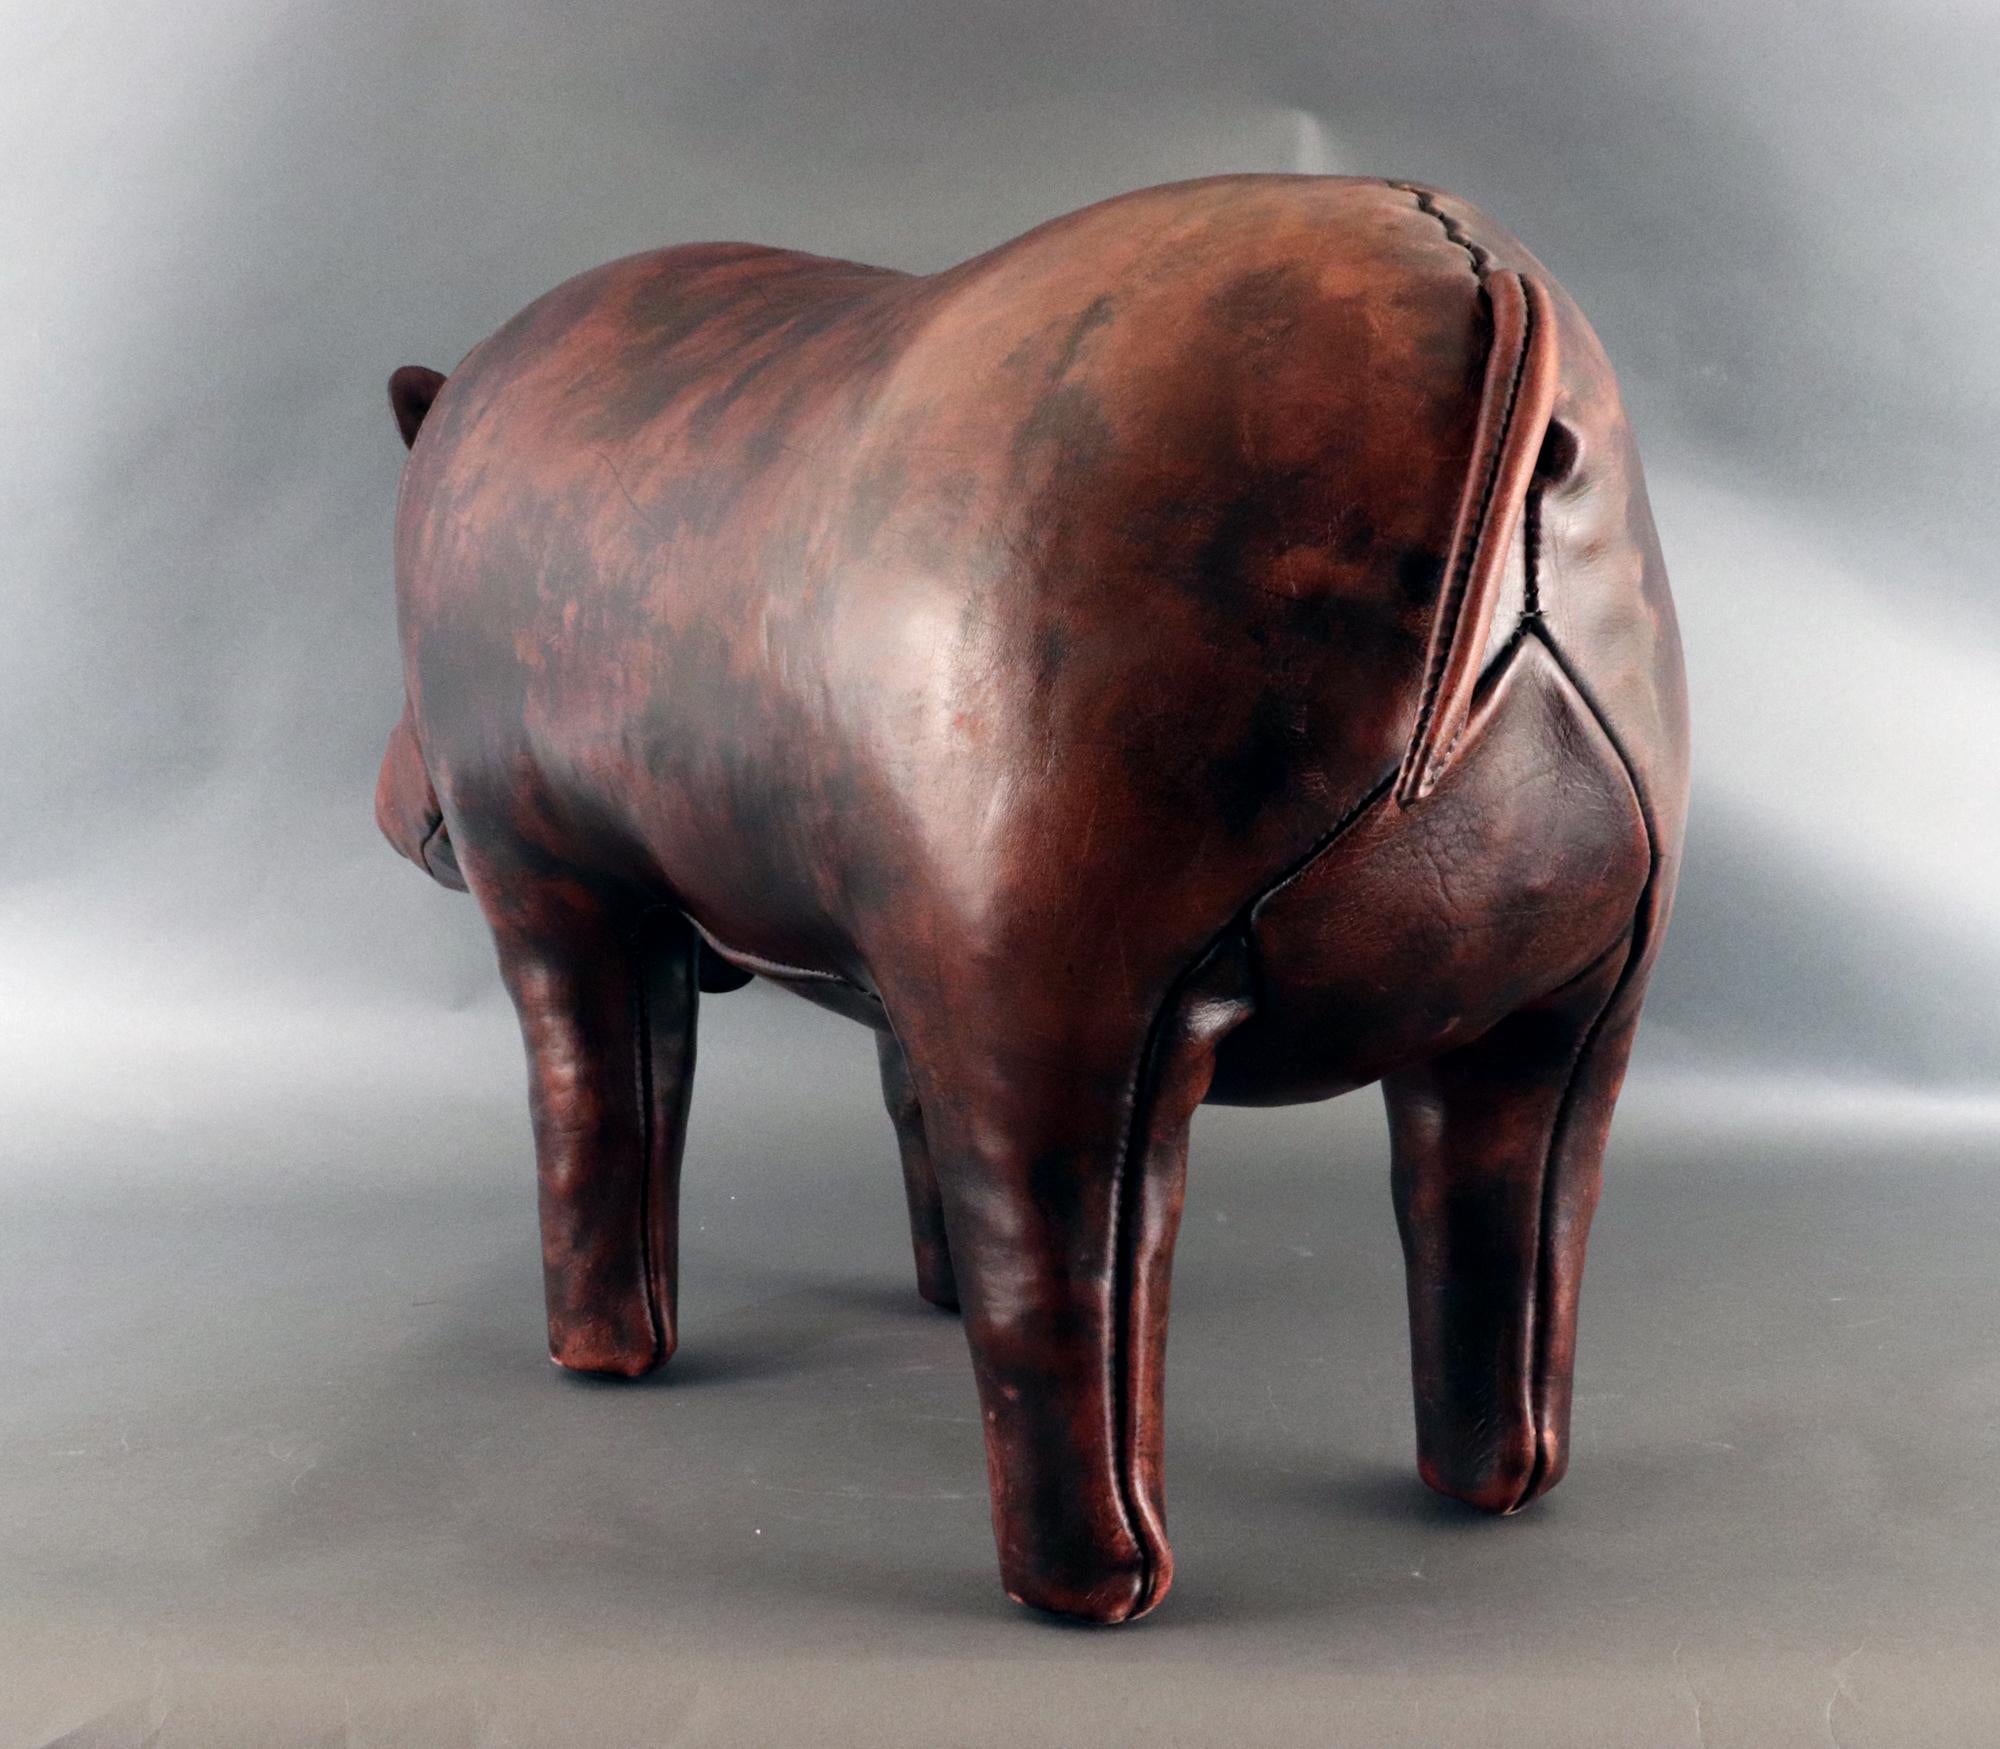 Mid-Century Modern English Leather Footstool in the form of a Hippo, Jancraft for Dimitri Omersa